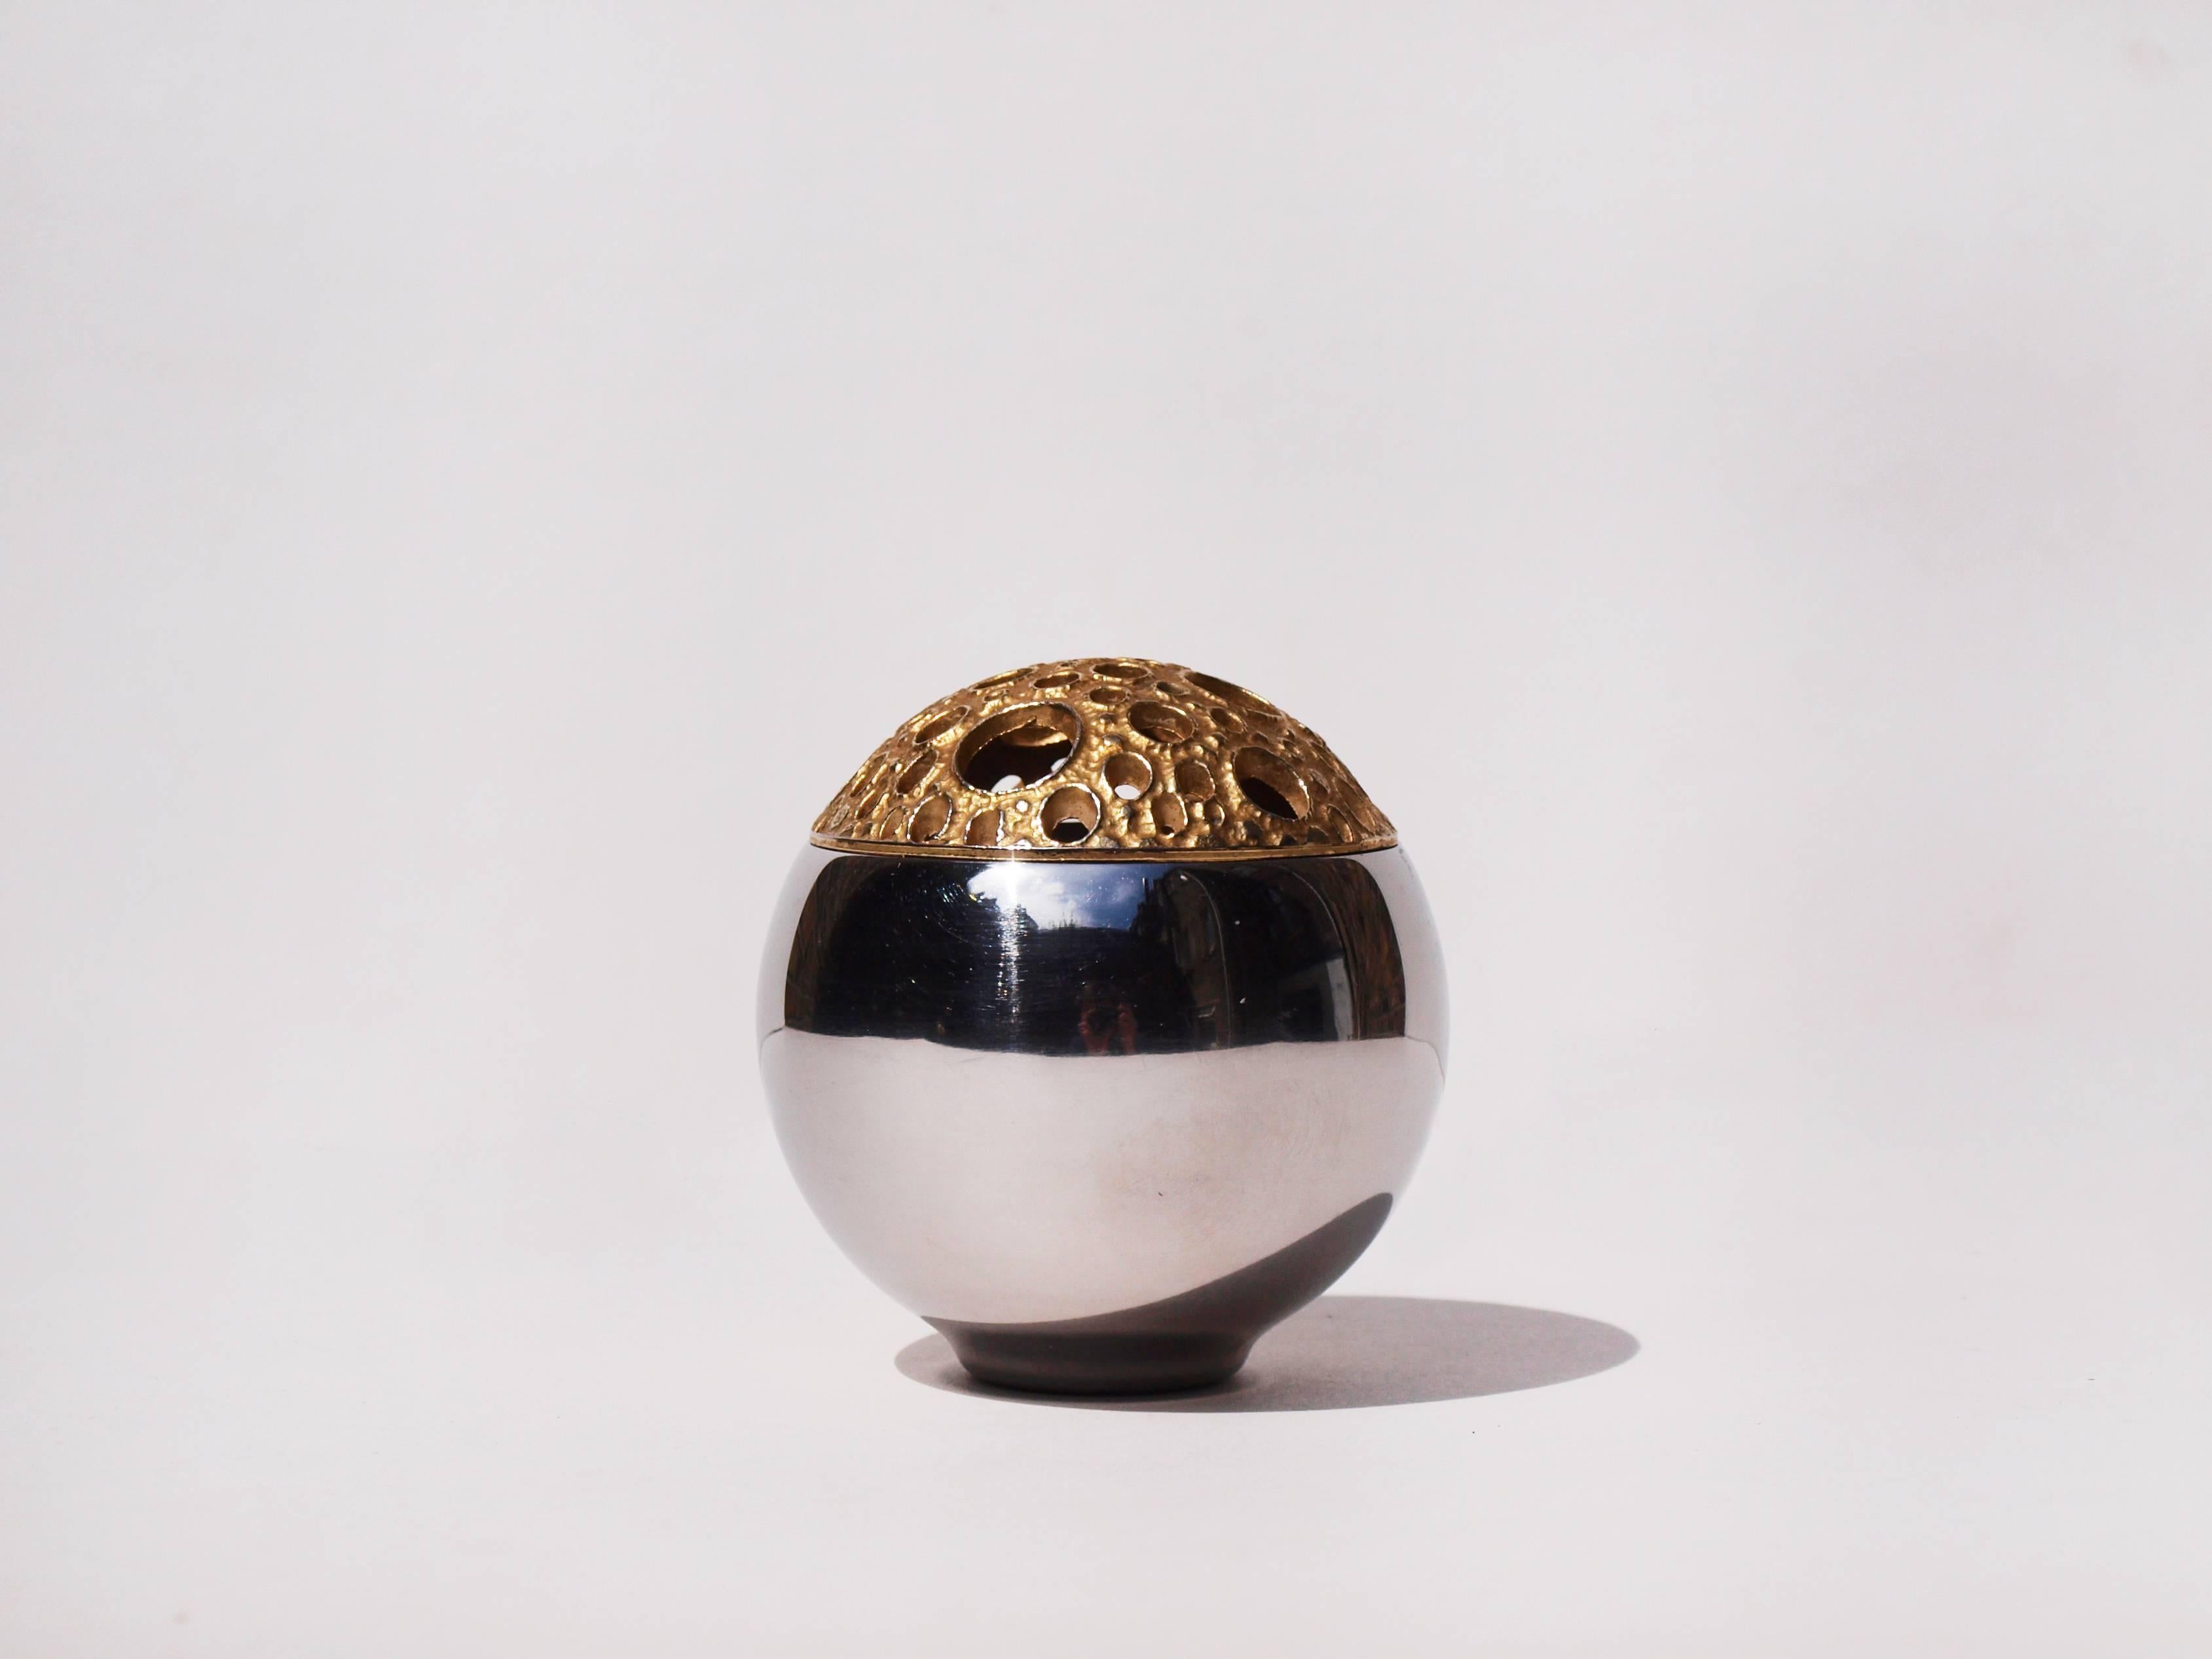 This stainless steel globe shaped vase was designed by renowned gold and silversmith, Stuart Devlin for Viners. Devlin worked with the company to produce collections of high end serveware. The Futurist vase features a gilded removable lid with